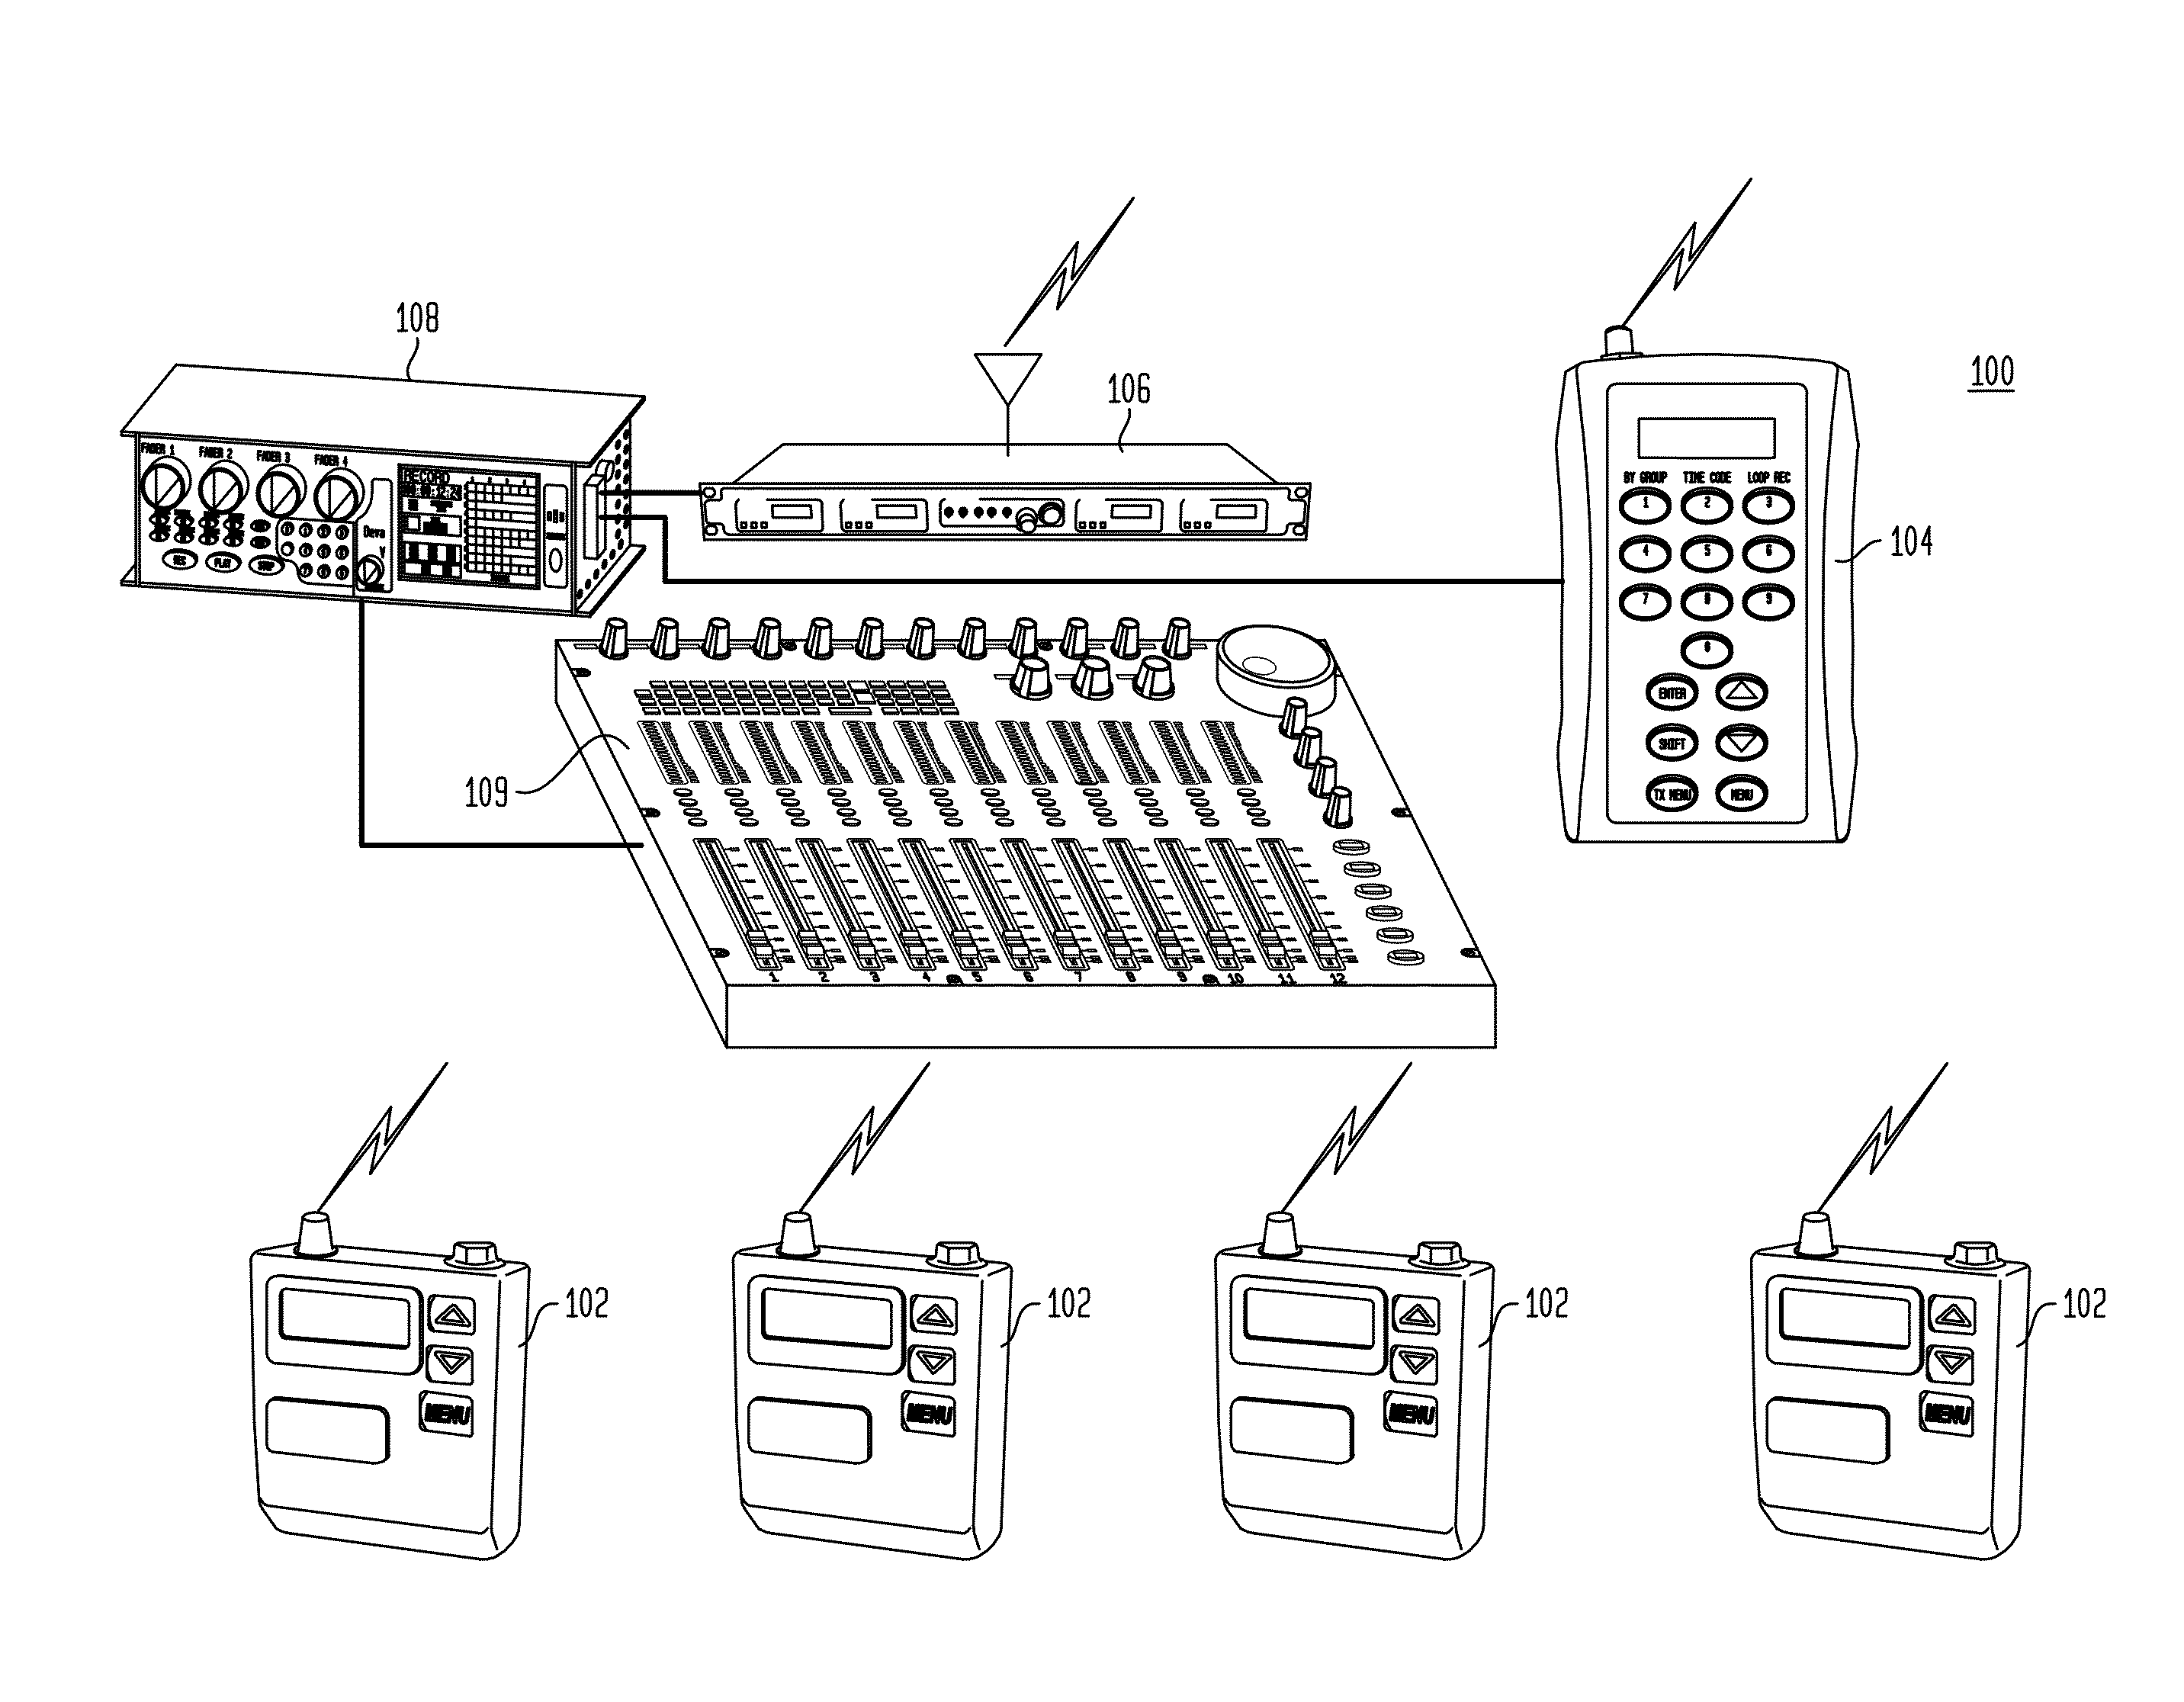 Systems and methods for remotely controlling local audio devices in a virtual wireless multitrack recording system